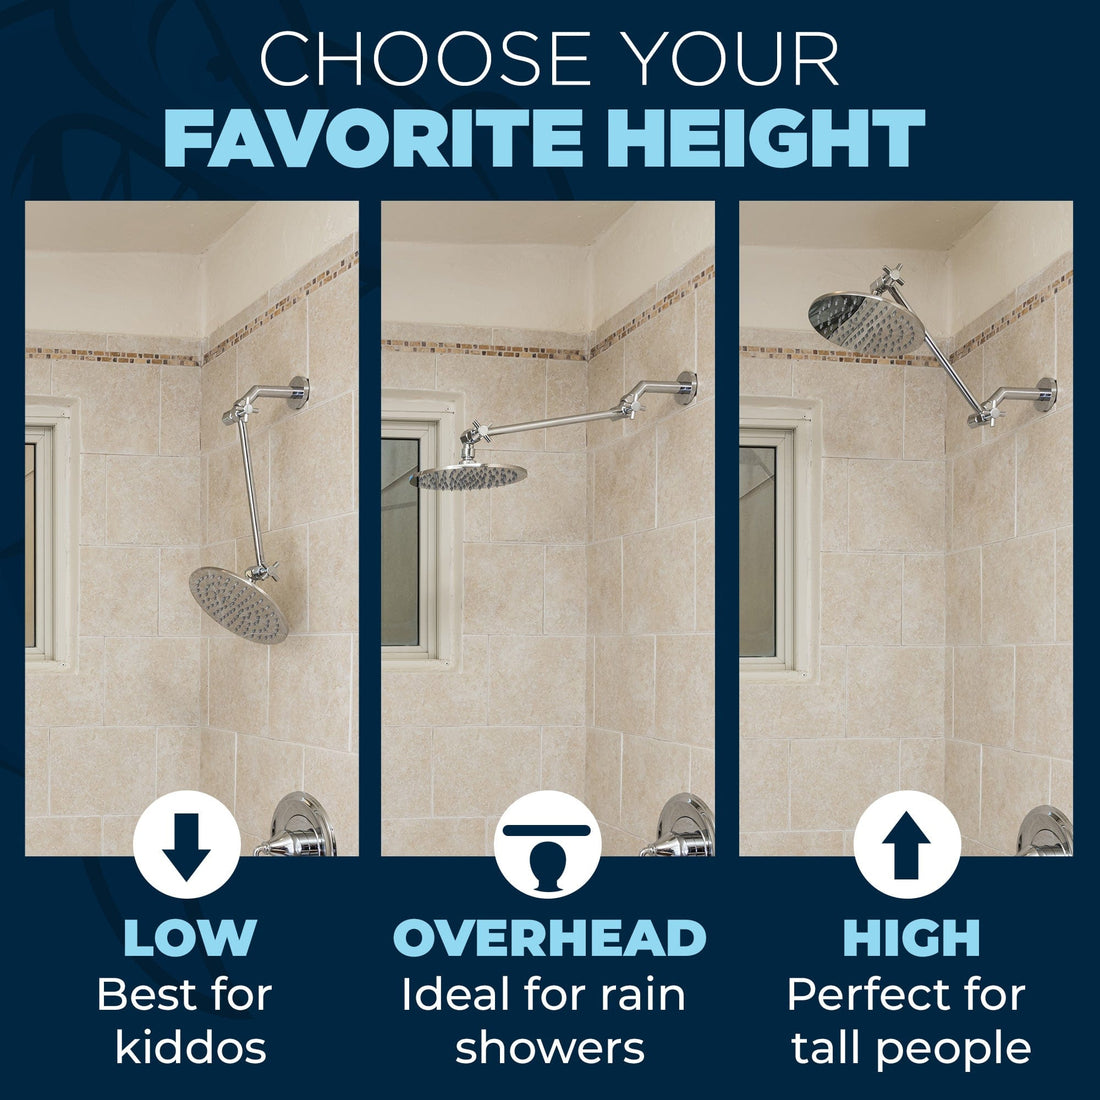 (Favorite Height 3) Choose Your Favorite Shower head Height with Adjustable Shower Arm Extension 12 Inch / Chrome - The Shower Head Store